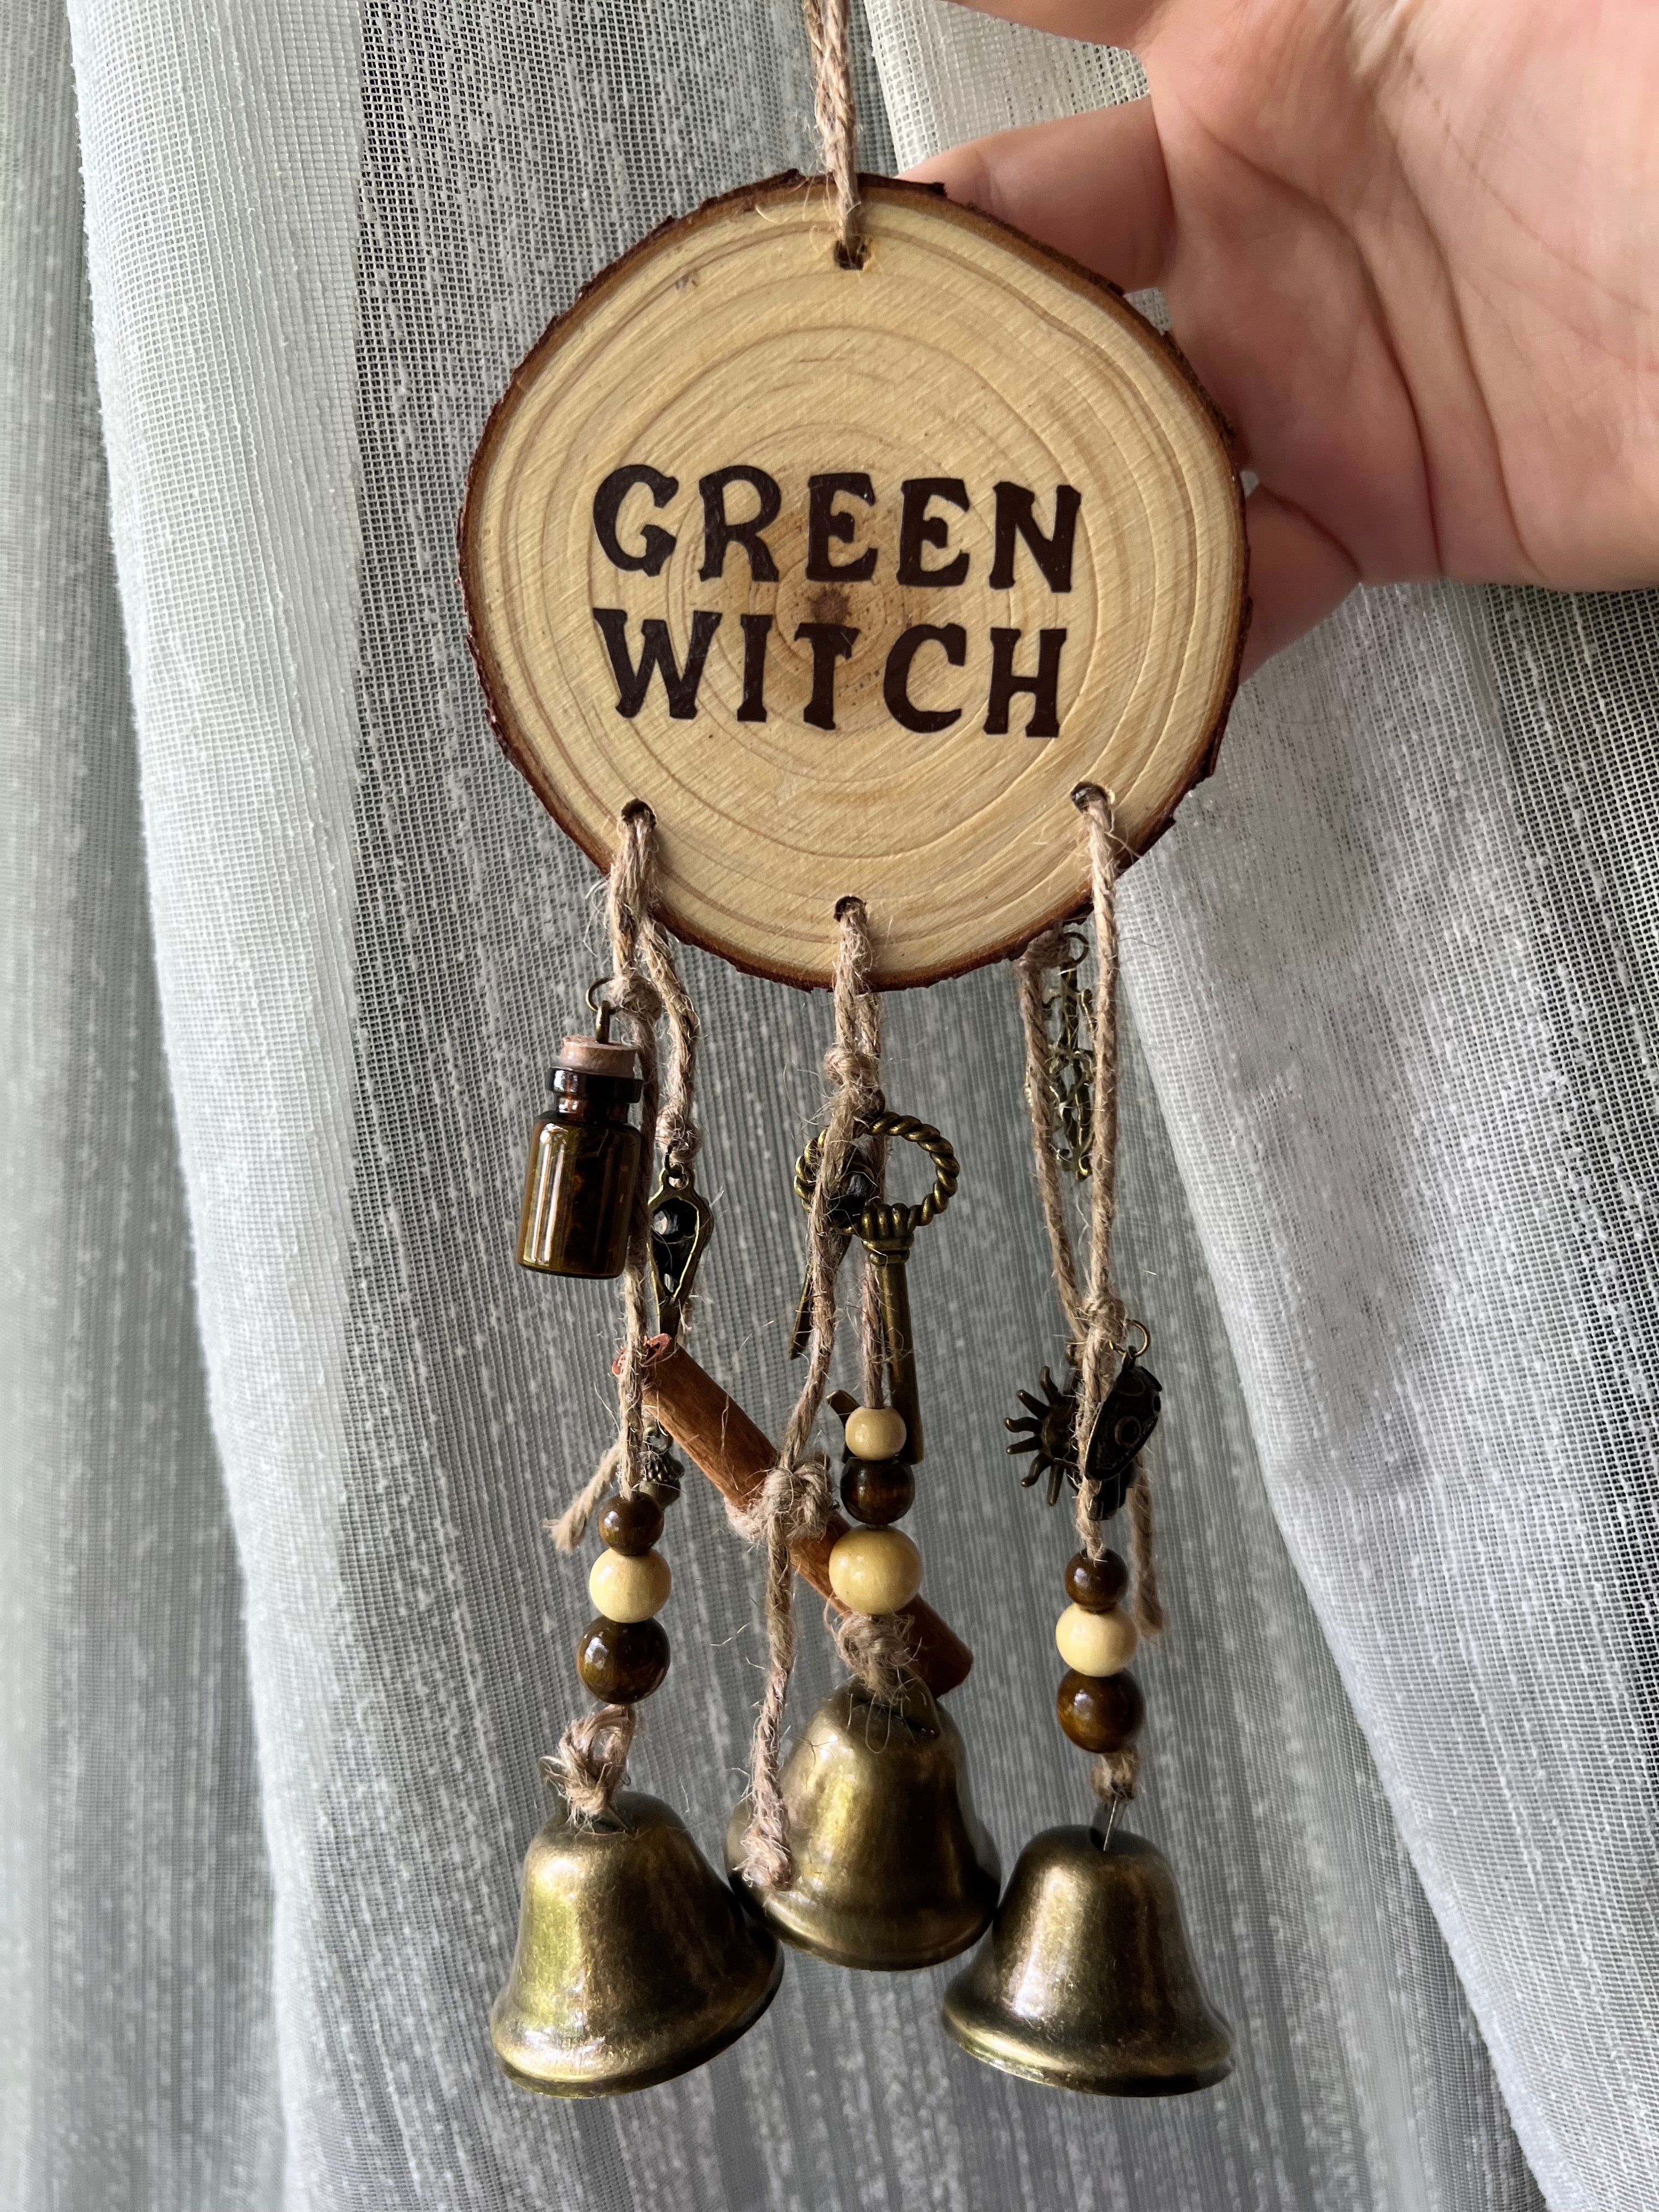 Handmade Witches Bells- Green Witch 2